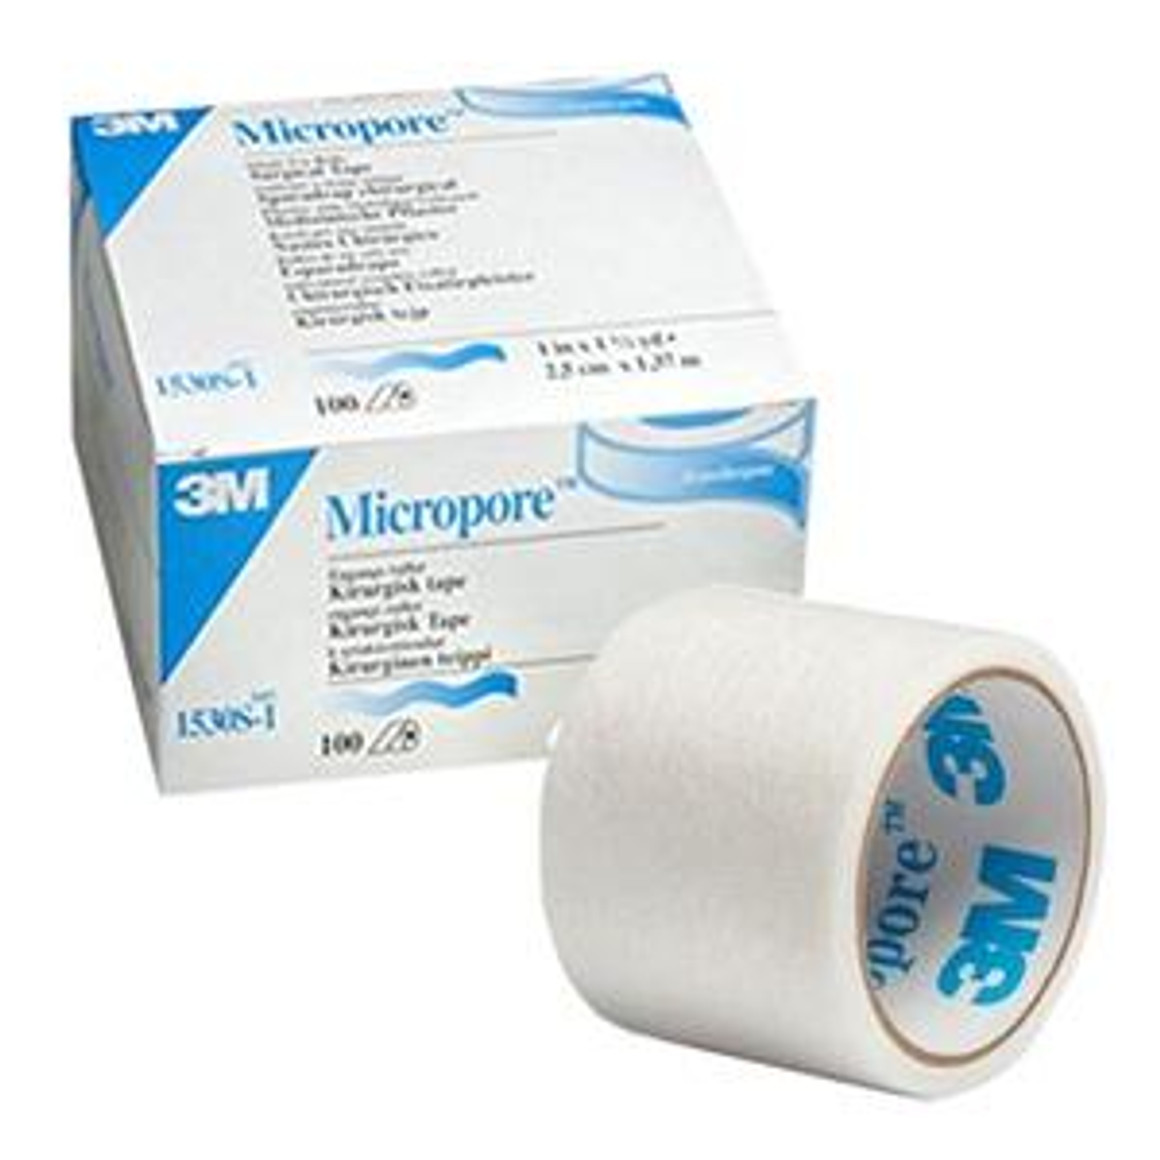 3M Micropore Medical Tape 1 Inch X 1-1/2 Yard - Box of 100 